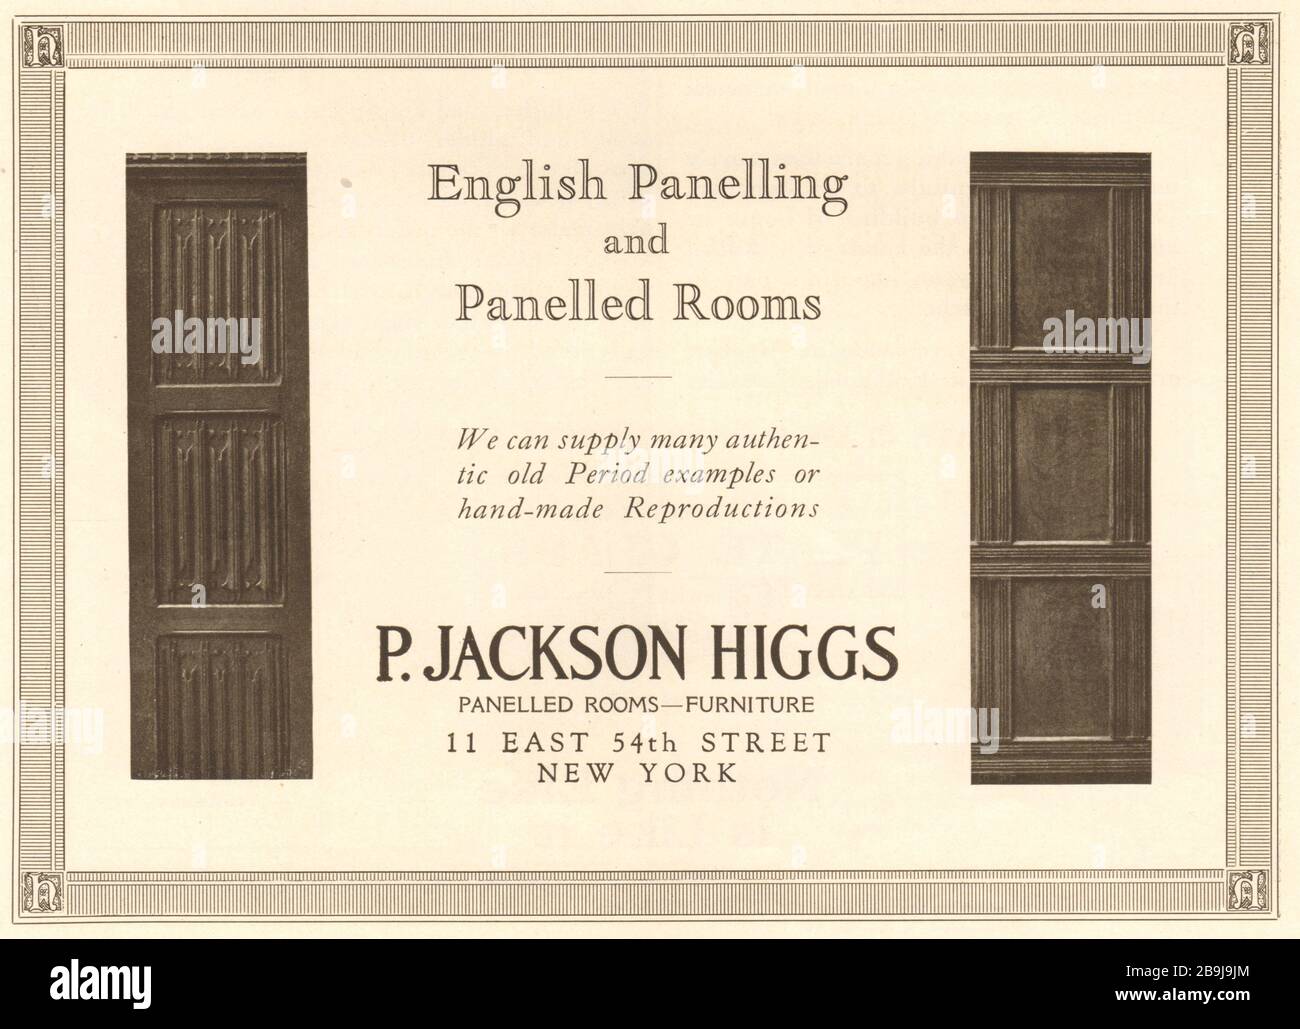 English panelling. P. Jackson Higgs, Panelled rooms-furniture, 11 East 54th street, New York (1922) Stock Photo